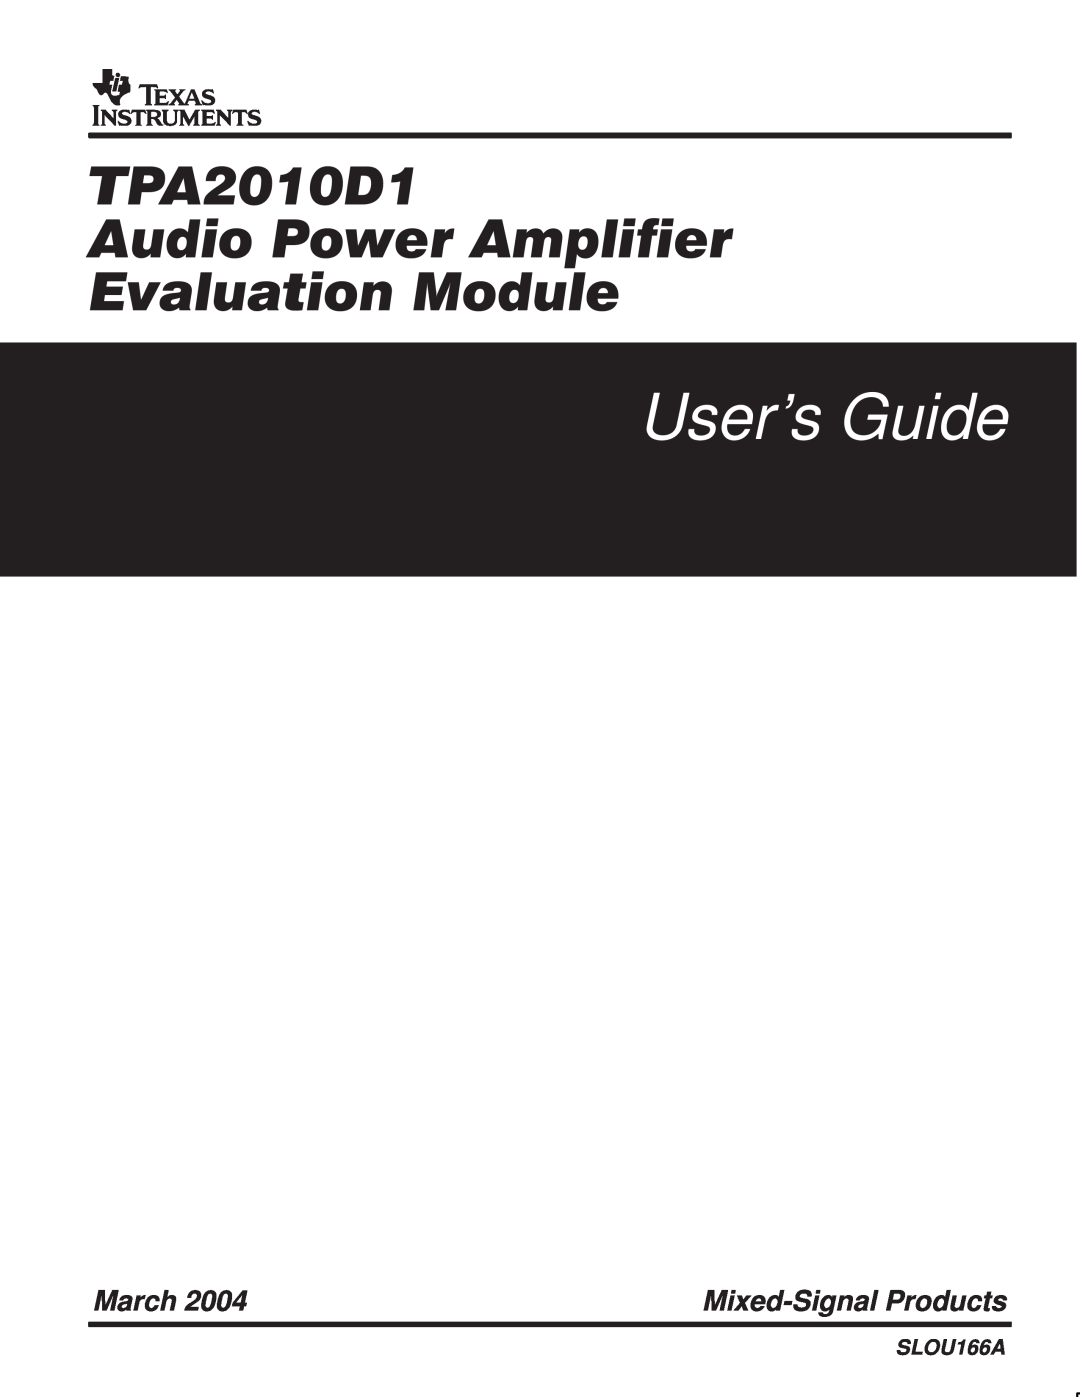 Texas Instruments 2004 manual User’s Guide, TPA2010D1 Audio Power Amplifier Evaluation Module, March, Mixed-SignalProducts 